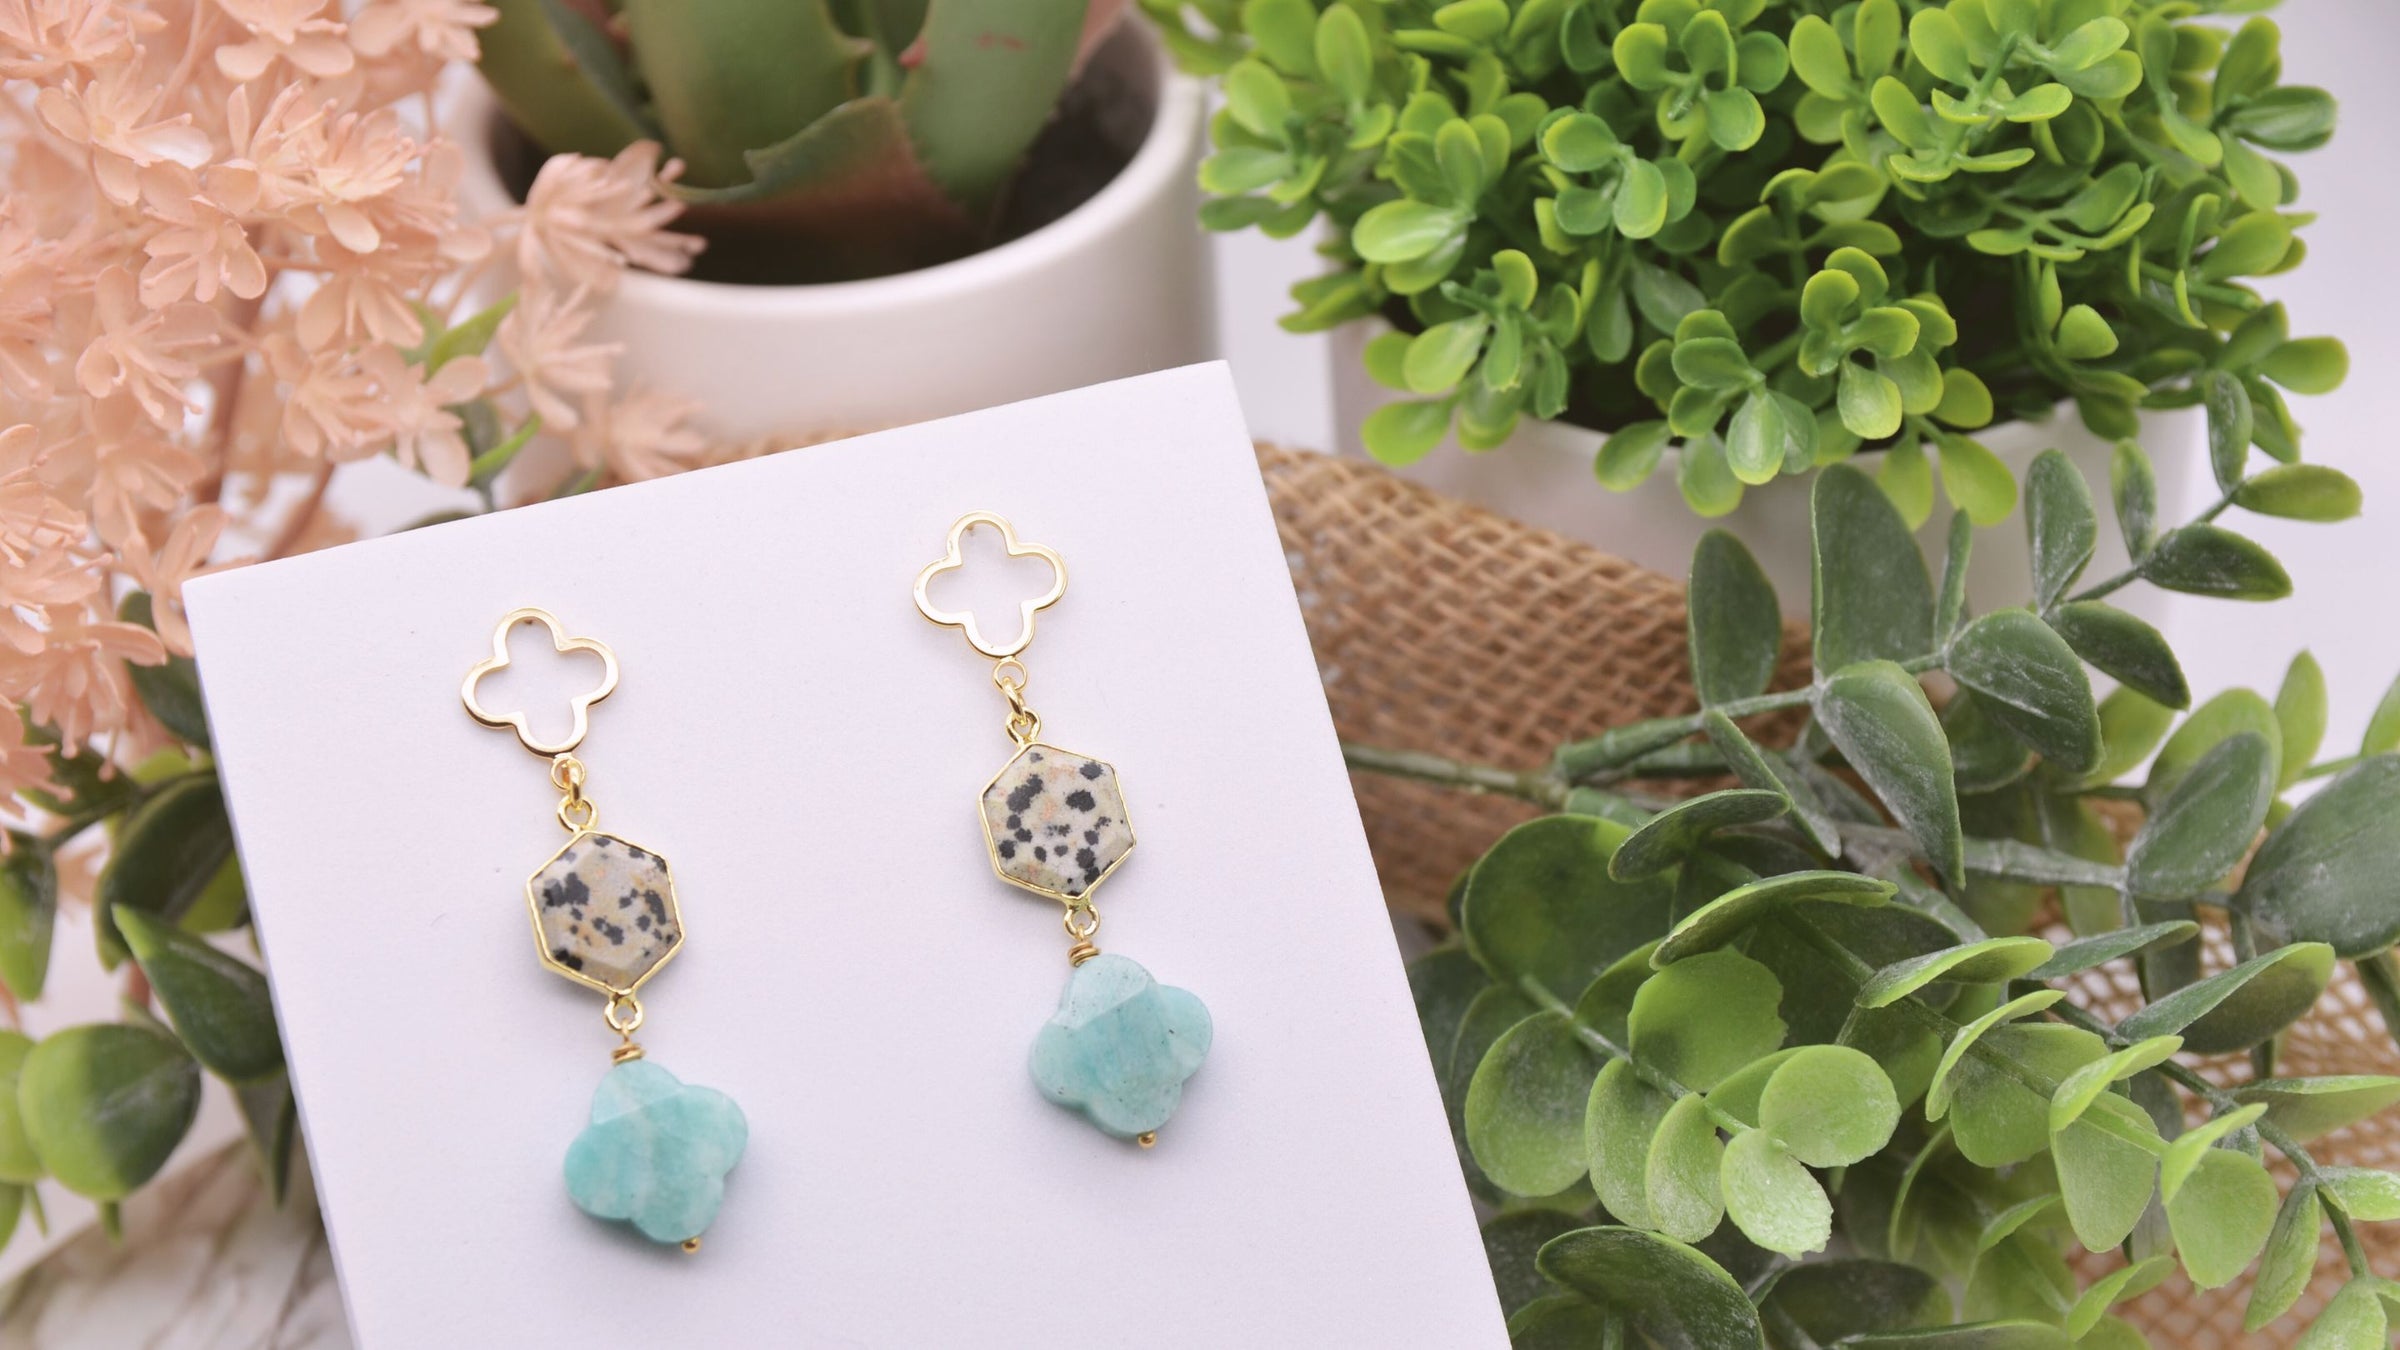 Four leaf clover earrings for St. Patrick's Day, Pinch proof green jewelry | Emerald Sun Creations